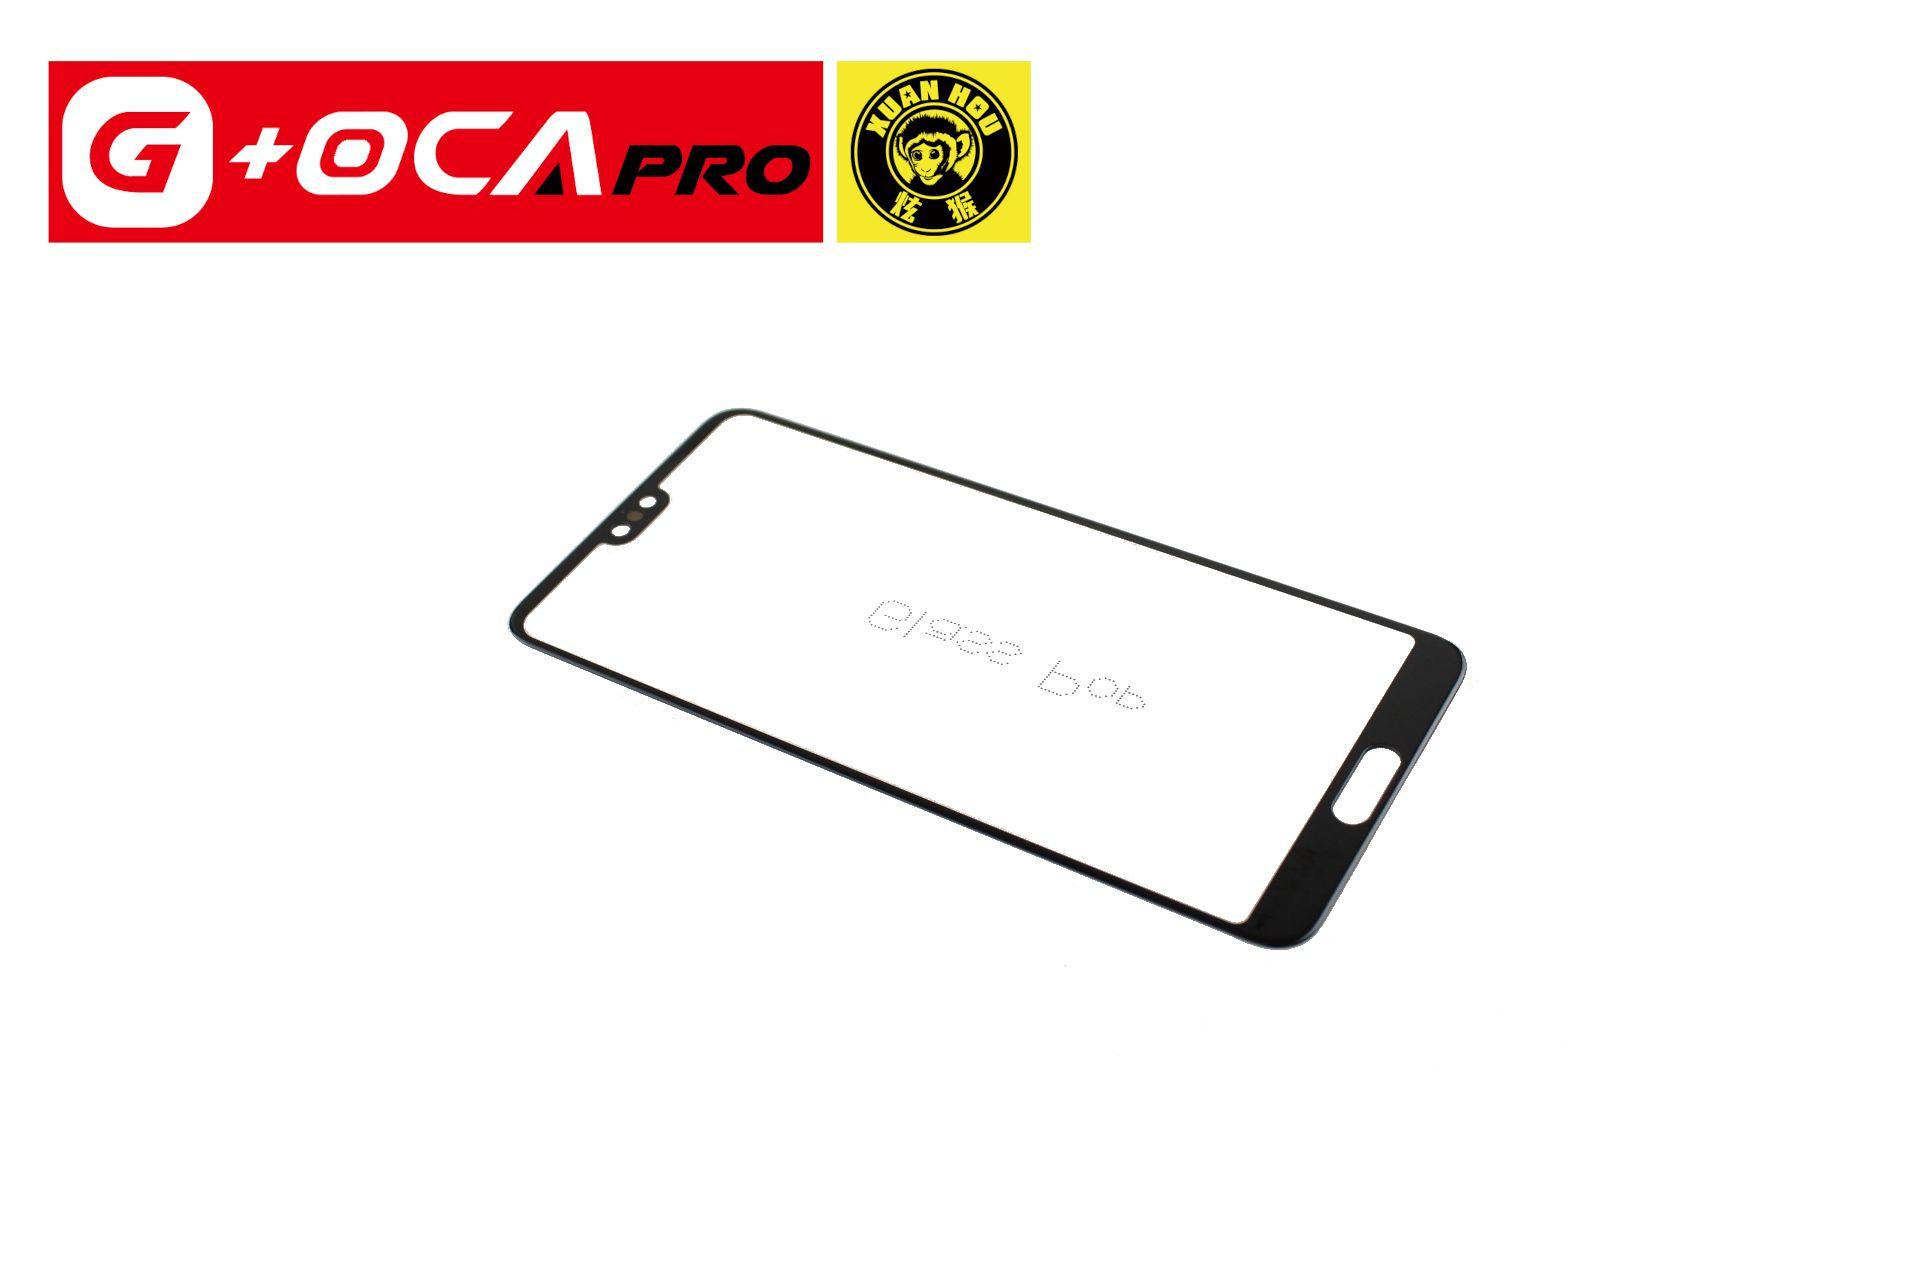 Glass G + OCA Pro (with oleophobic cover) Huawei P20